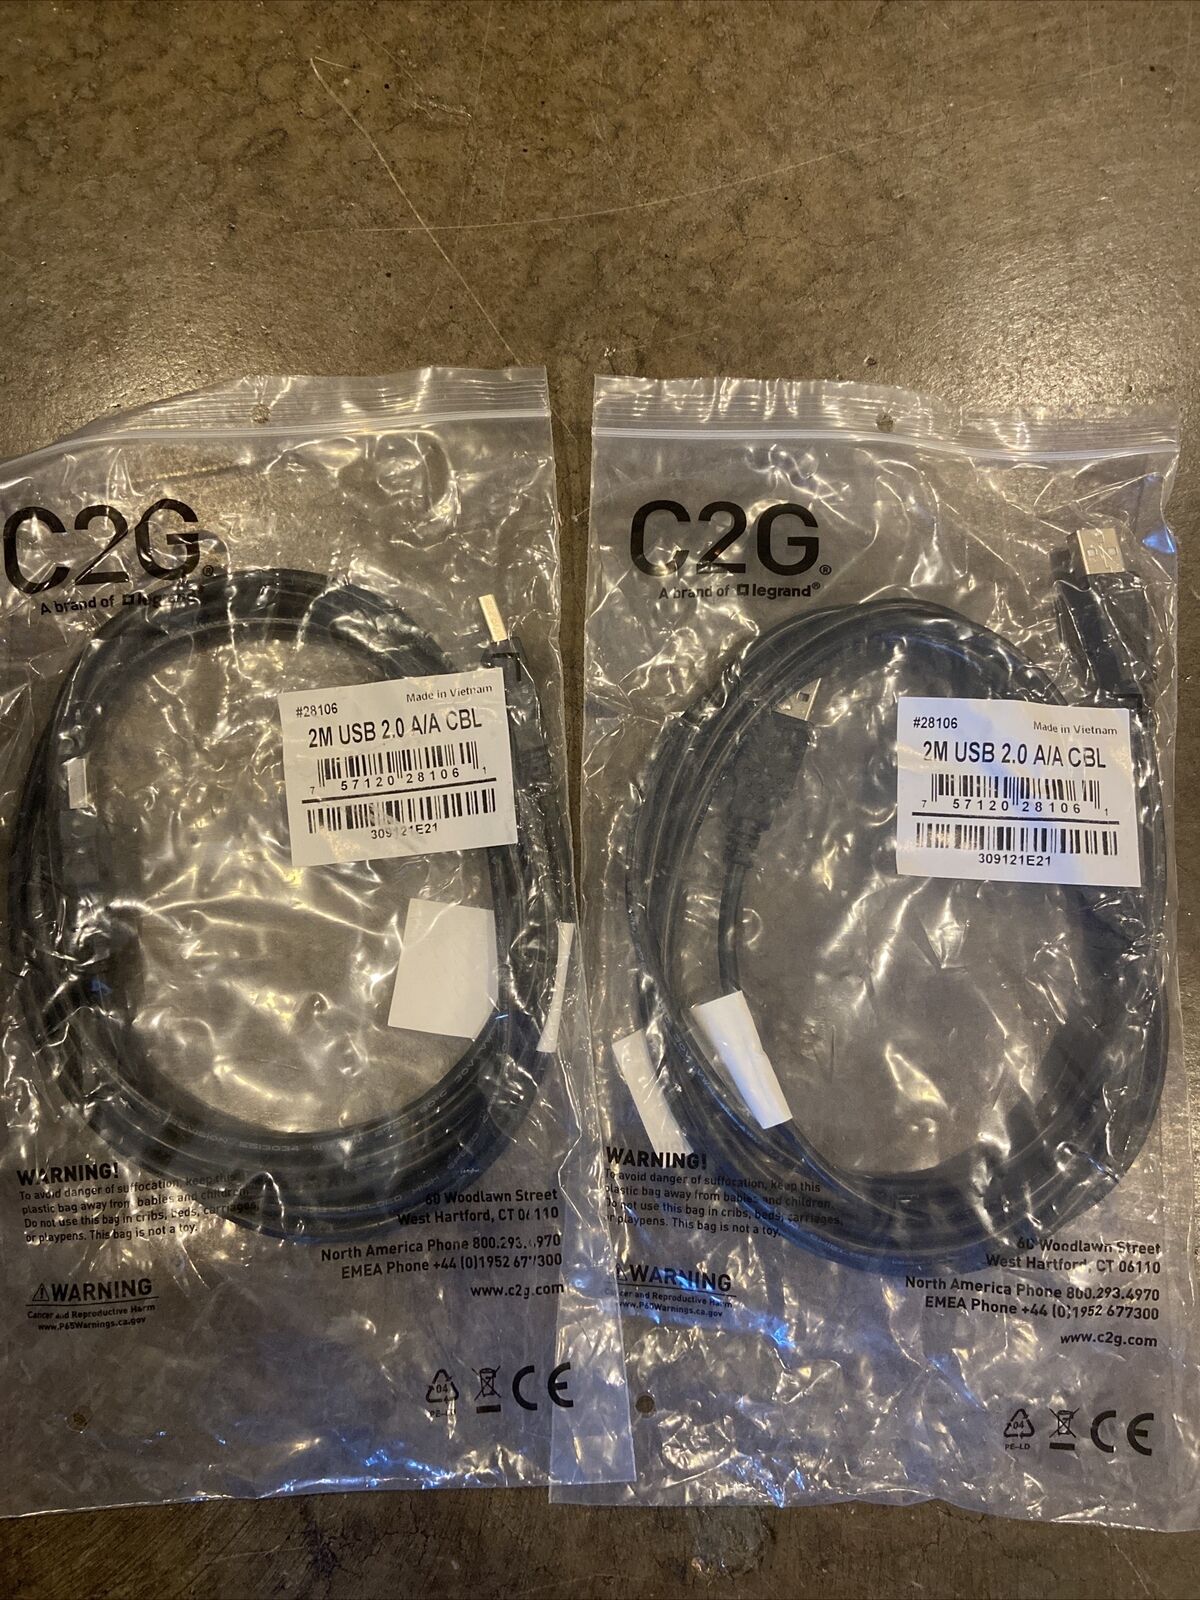 Lot of 2 CablesToGo #28106 2M USB 2.0 A/A Cable